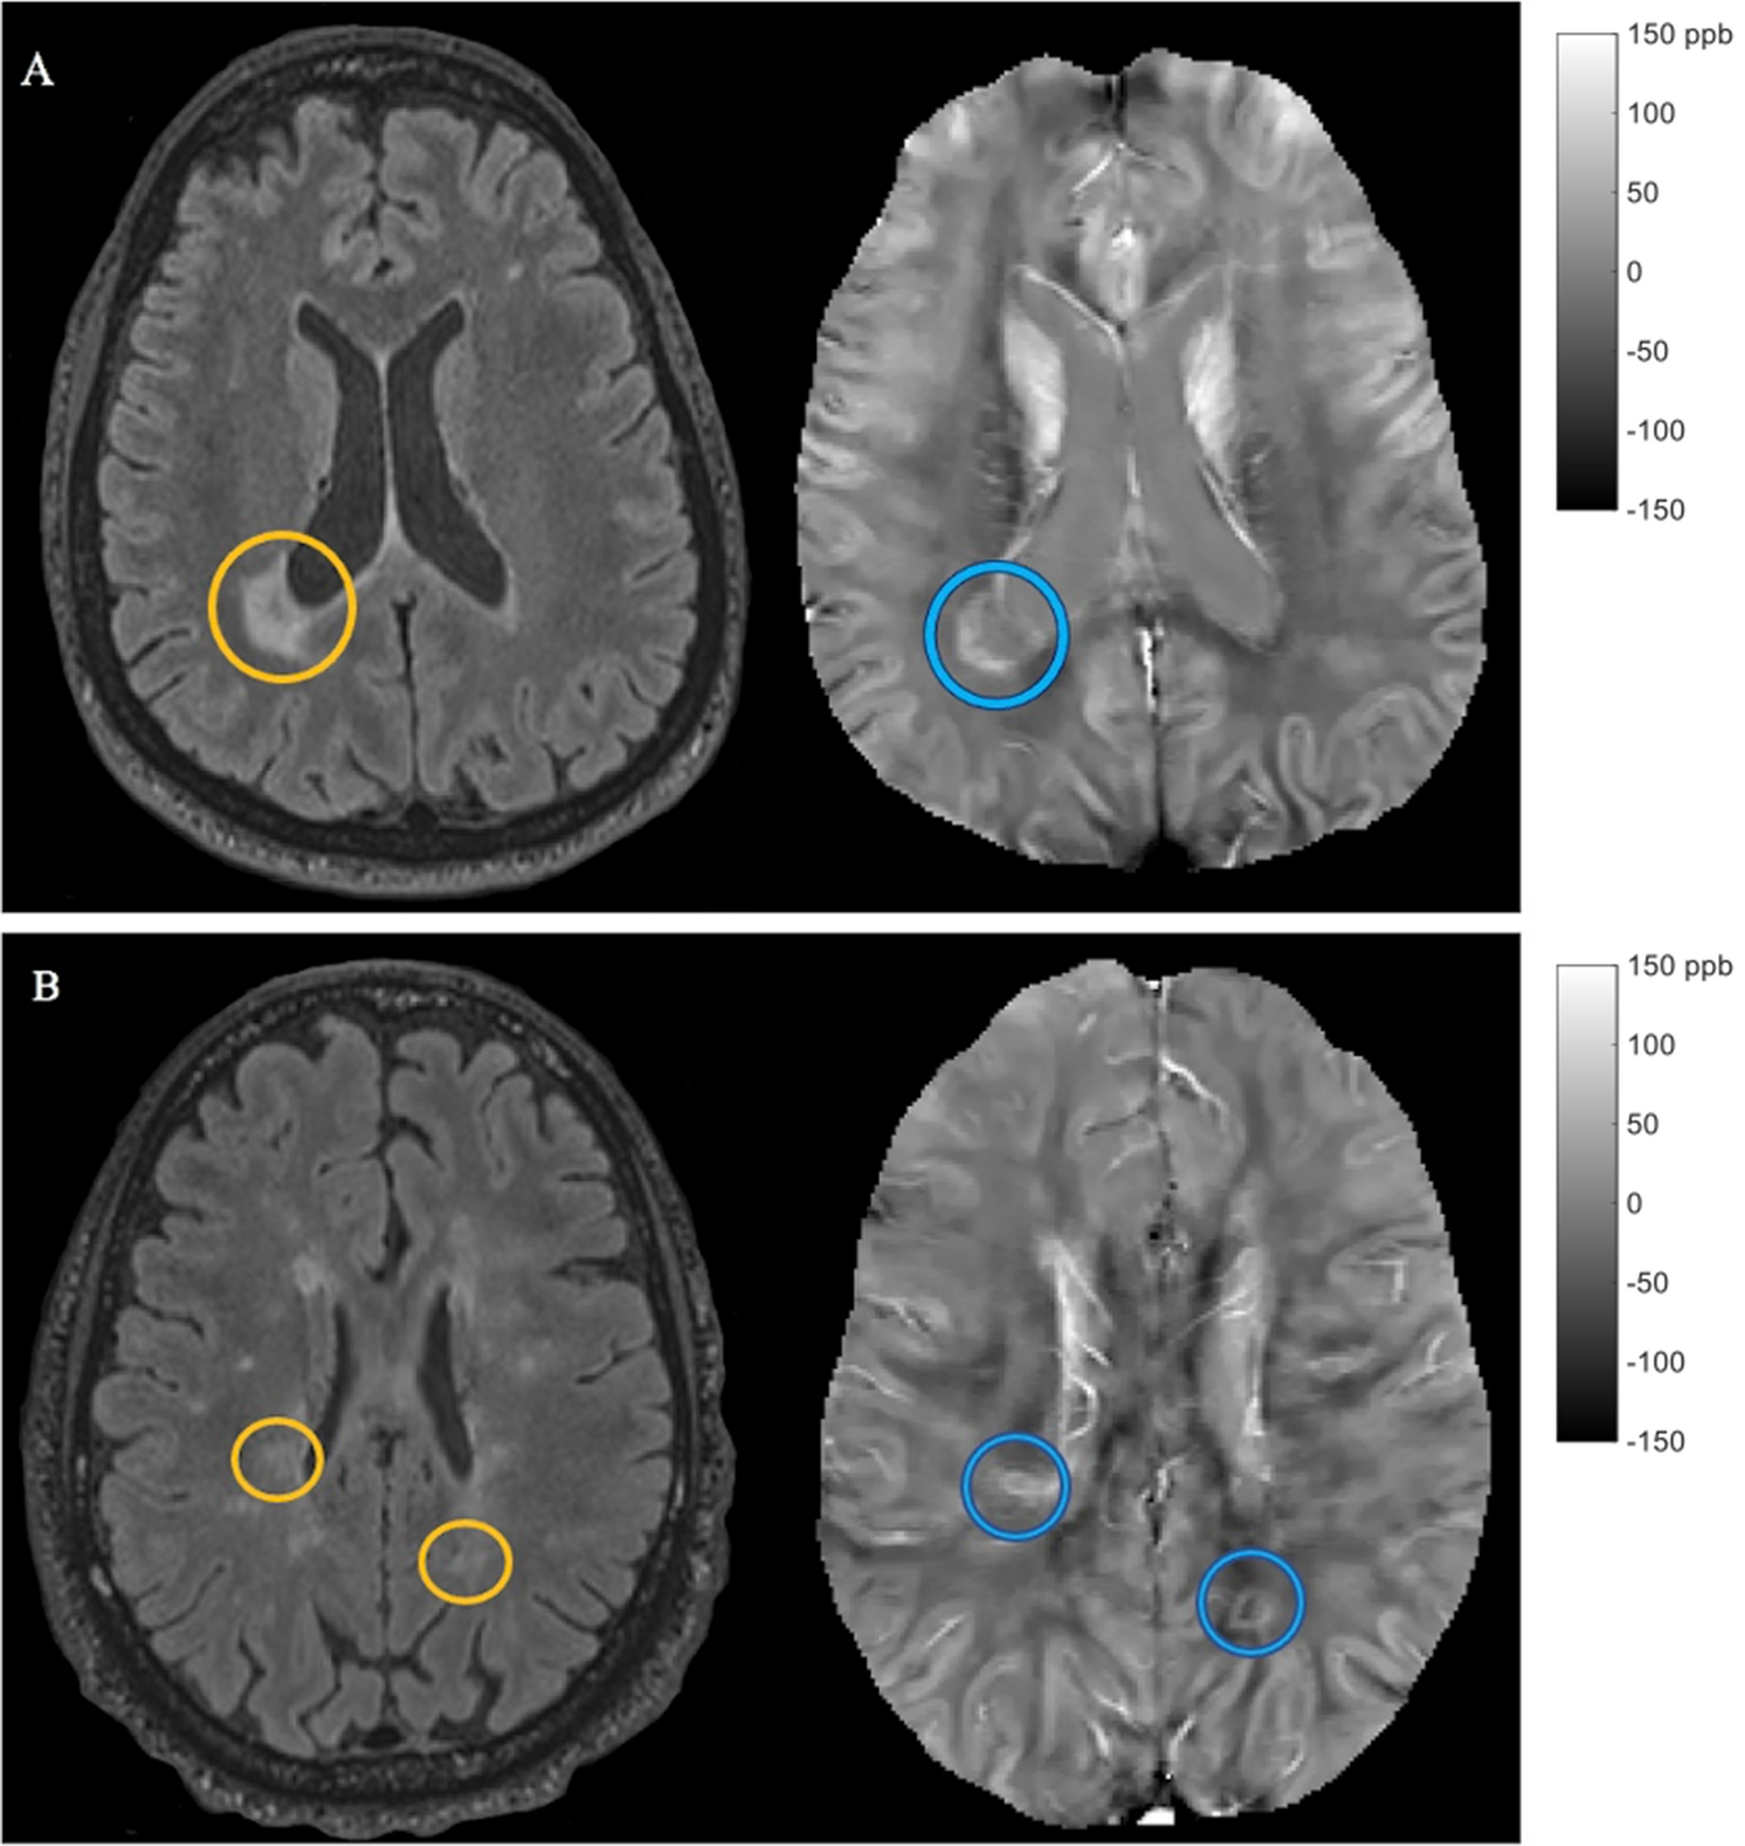 A Review of Clinical and Imaging Findings in Tumefactive Demyelination | AJR